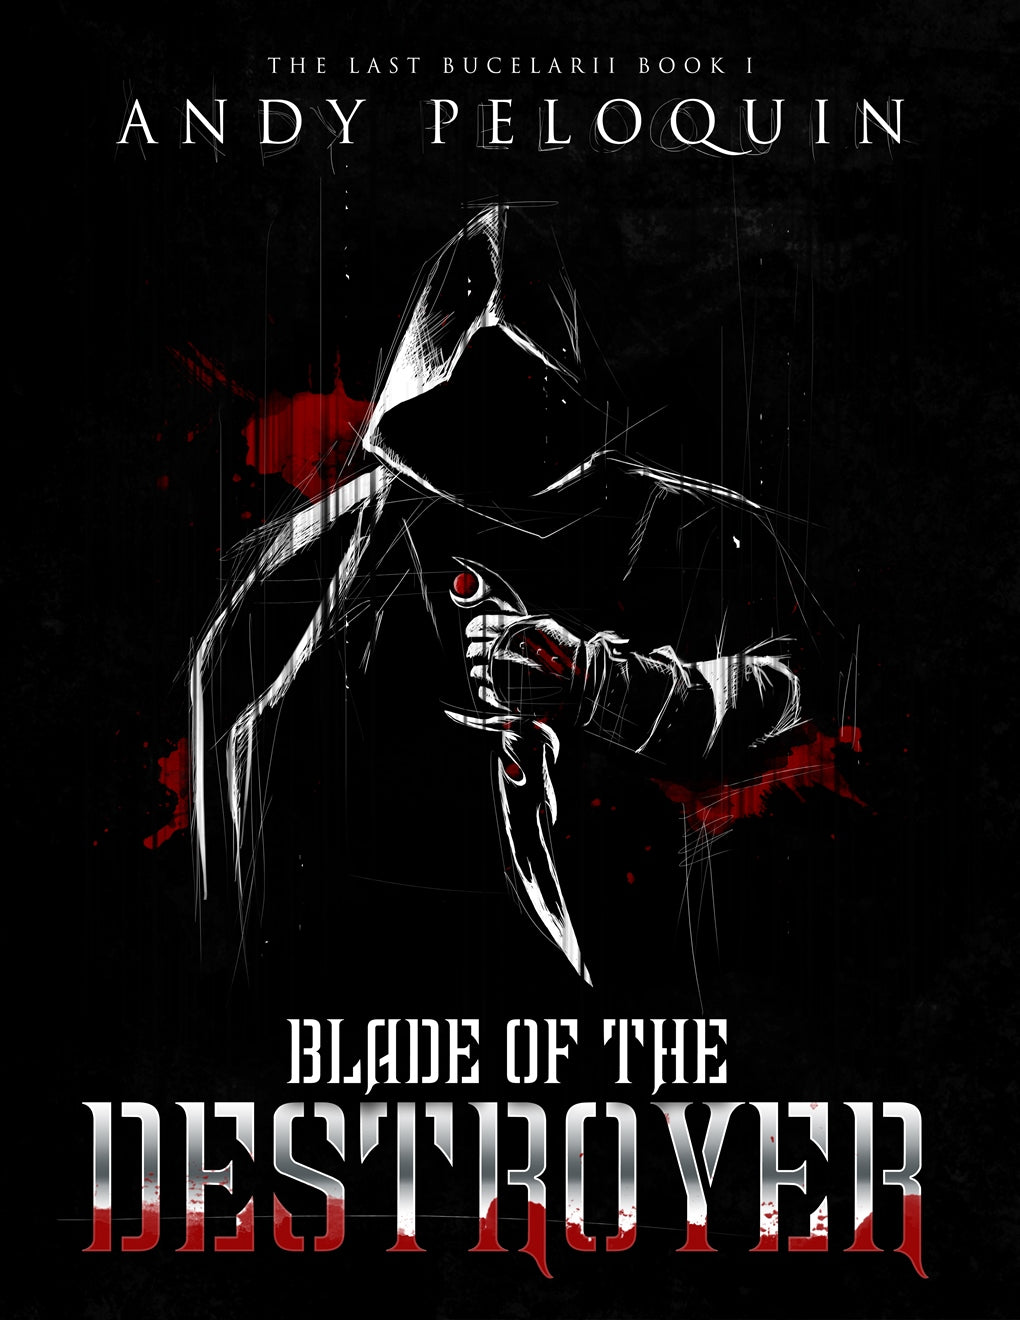 Blade of the Destroyer Blog Tour Part 2